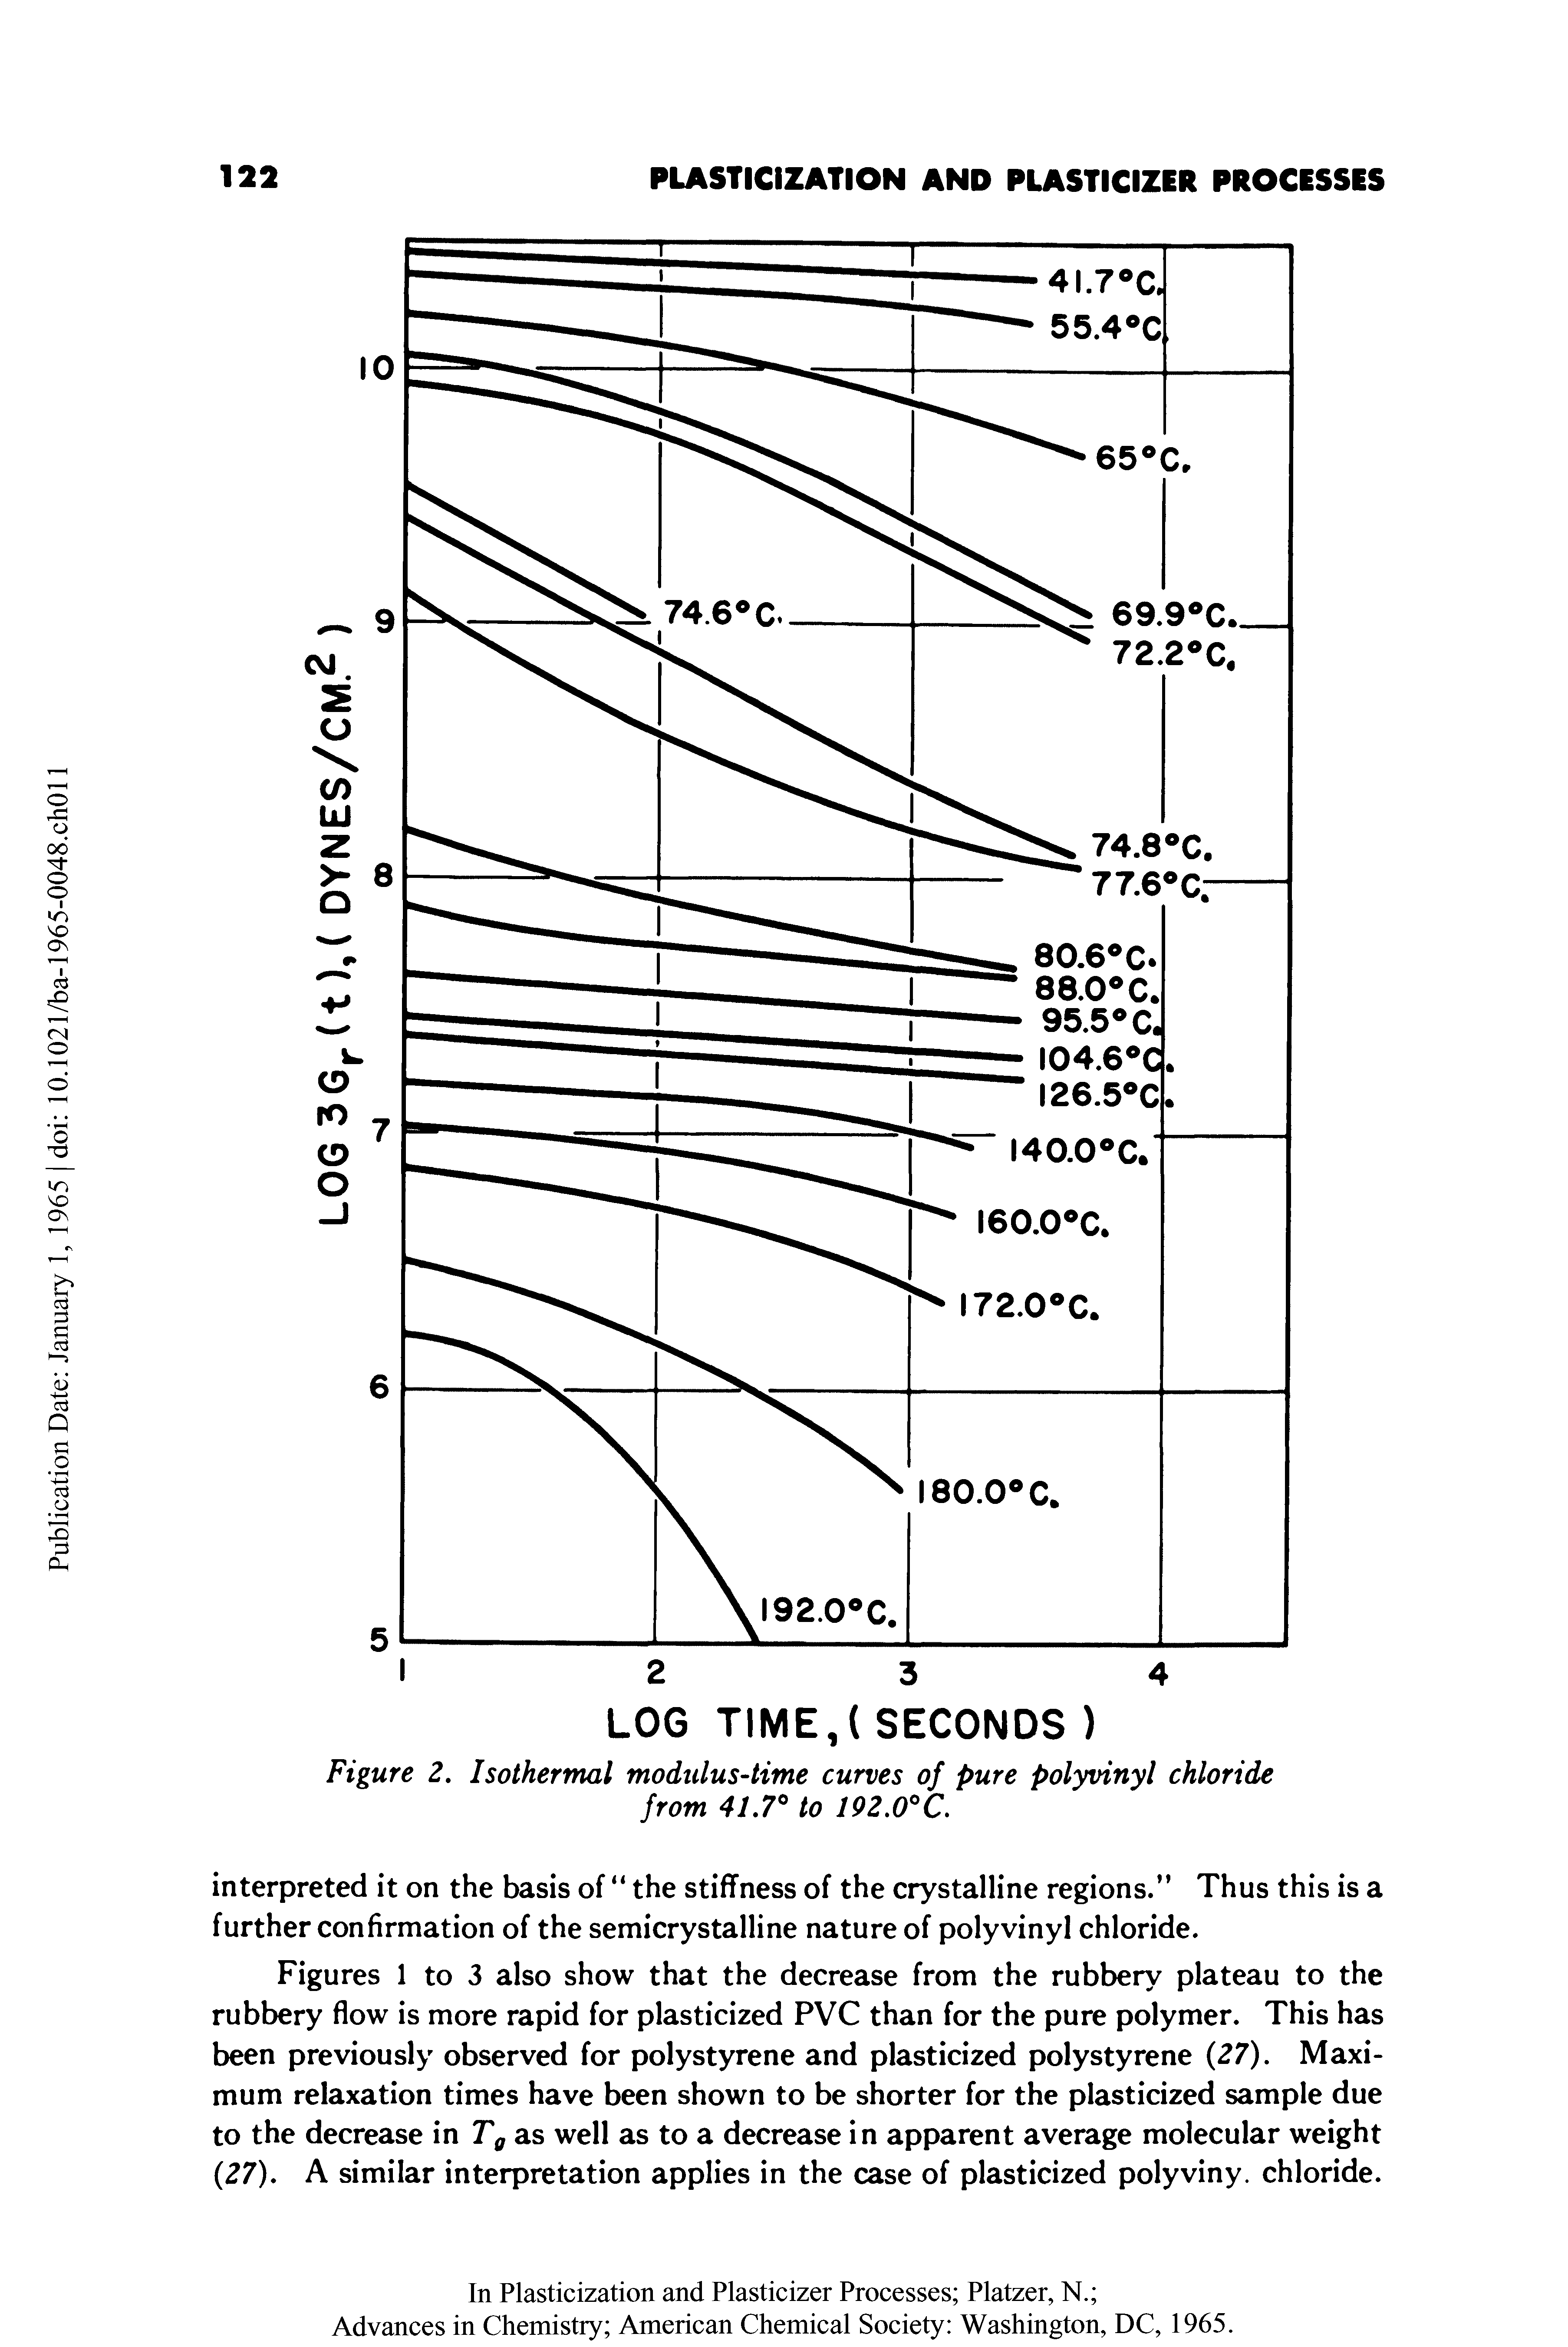 Figure 2. Isothermal modulus-time curves of pure polyvinyl chloride from 41.7° to 192.0°C.